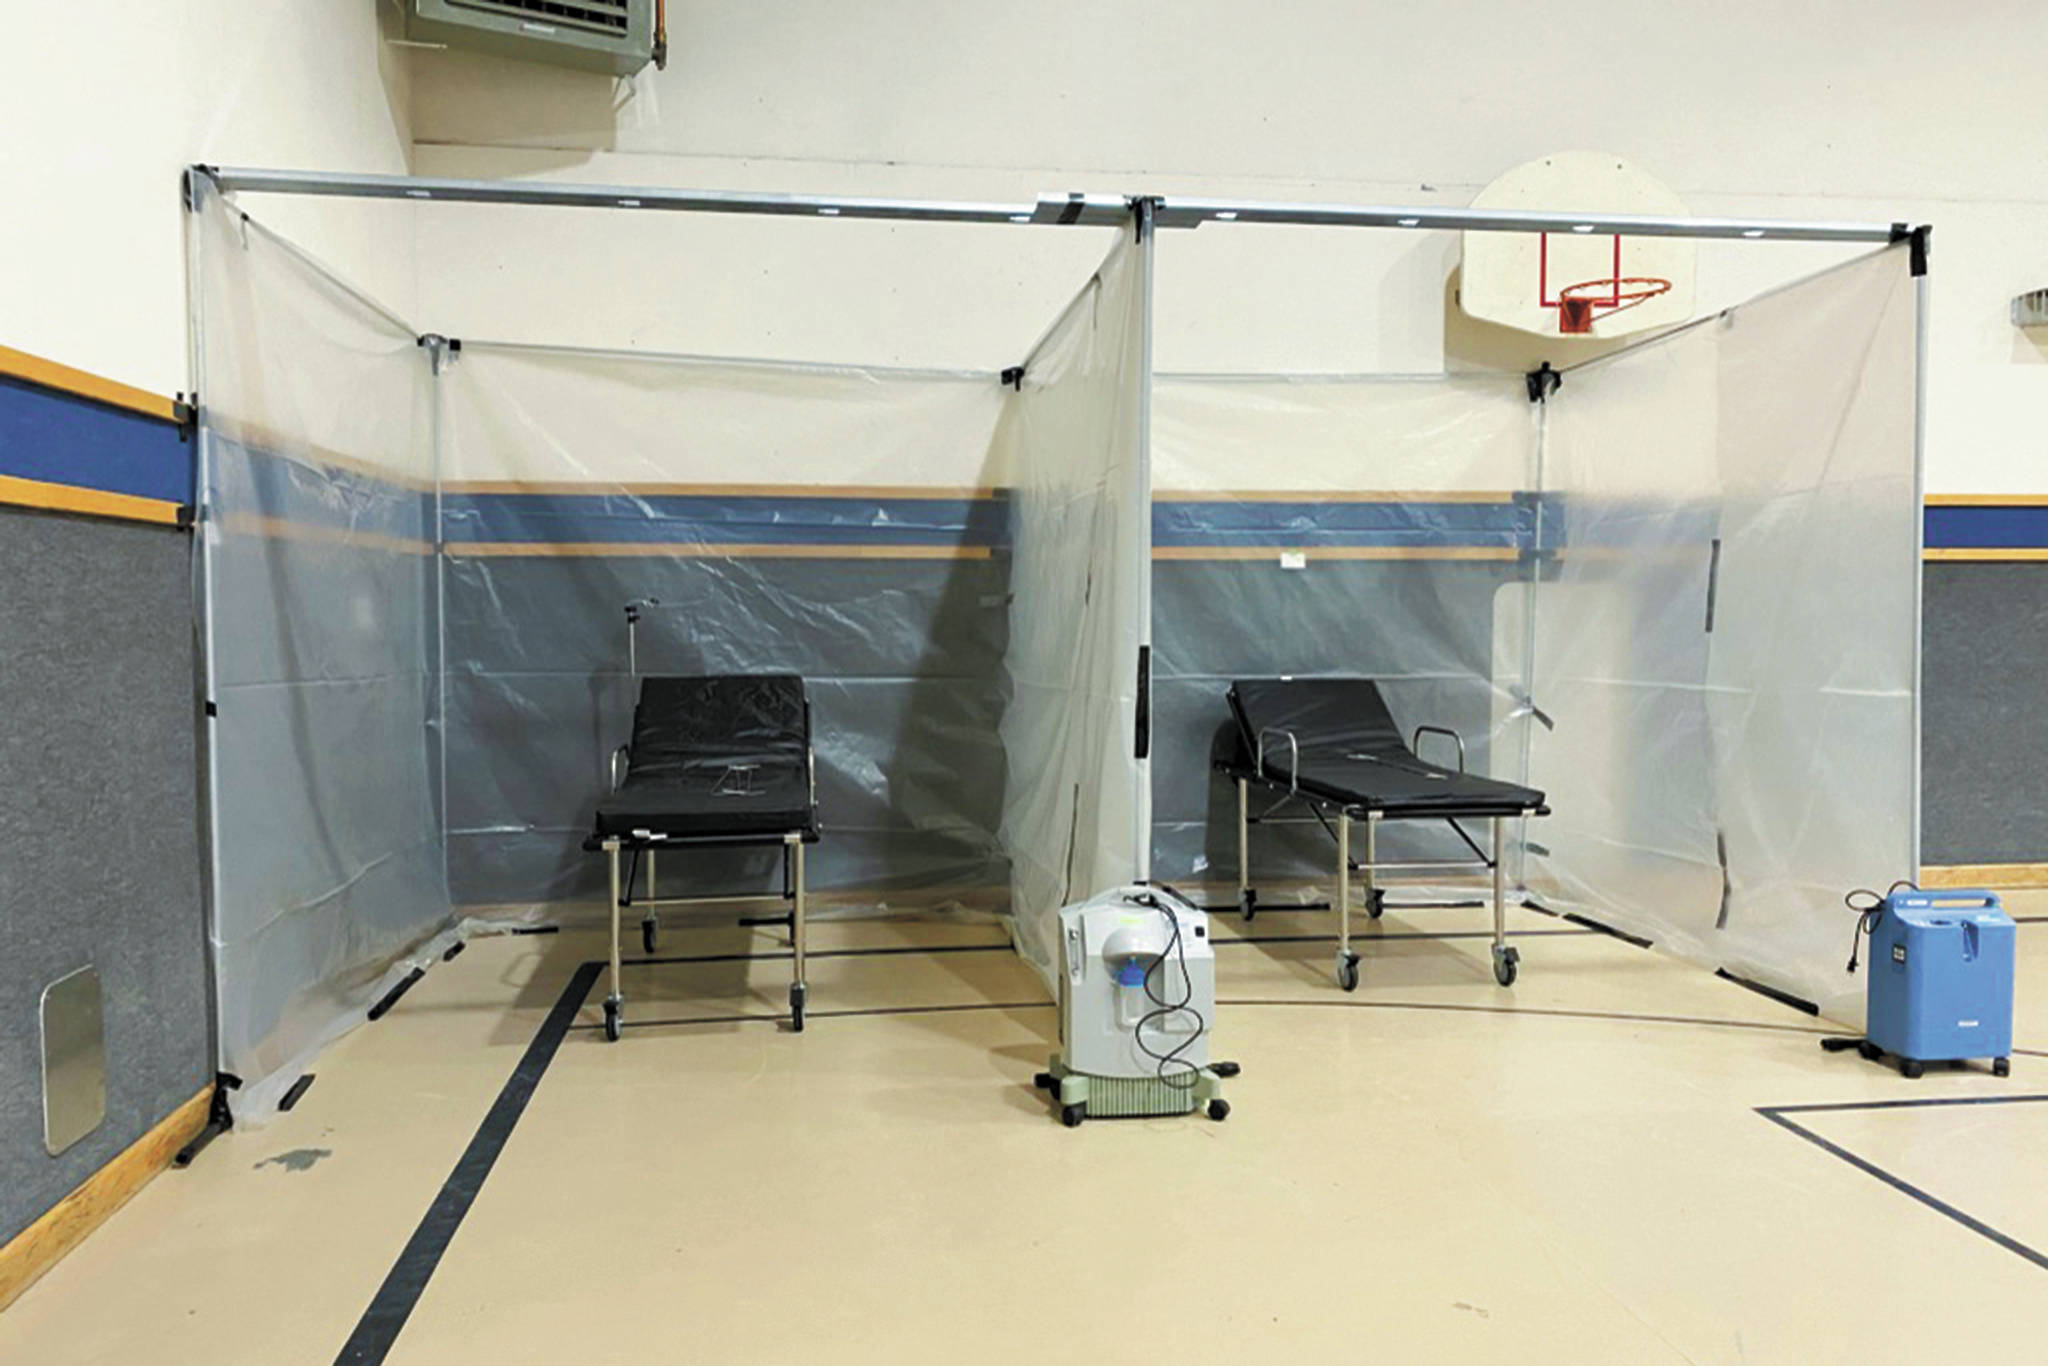 Spots for patients are shown at an alternate care site being set up at Christian Community Church on Bartlett Street in Homer, Alaska. This site will be used by South Peninsula Hospital to care for COVID-19 patients with moderate needs. (Photo courtesy South Peninsula Hospital)